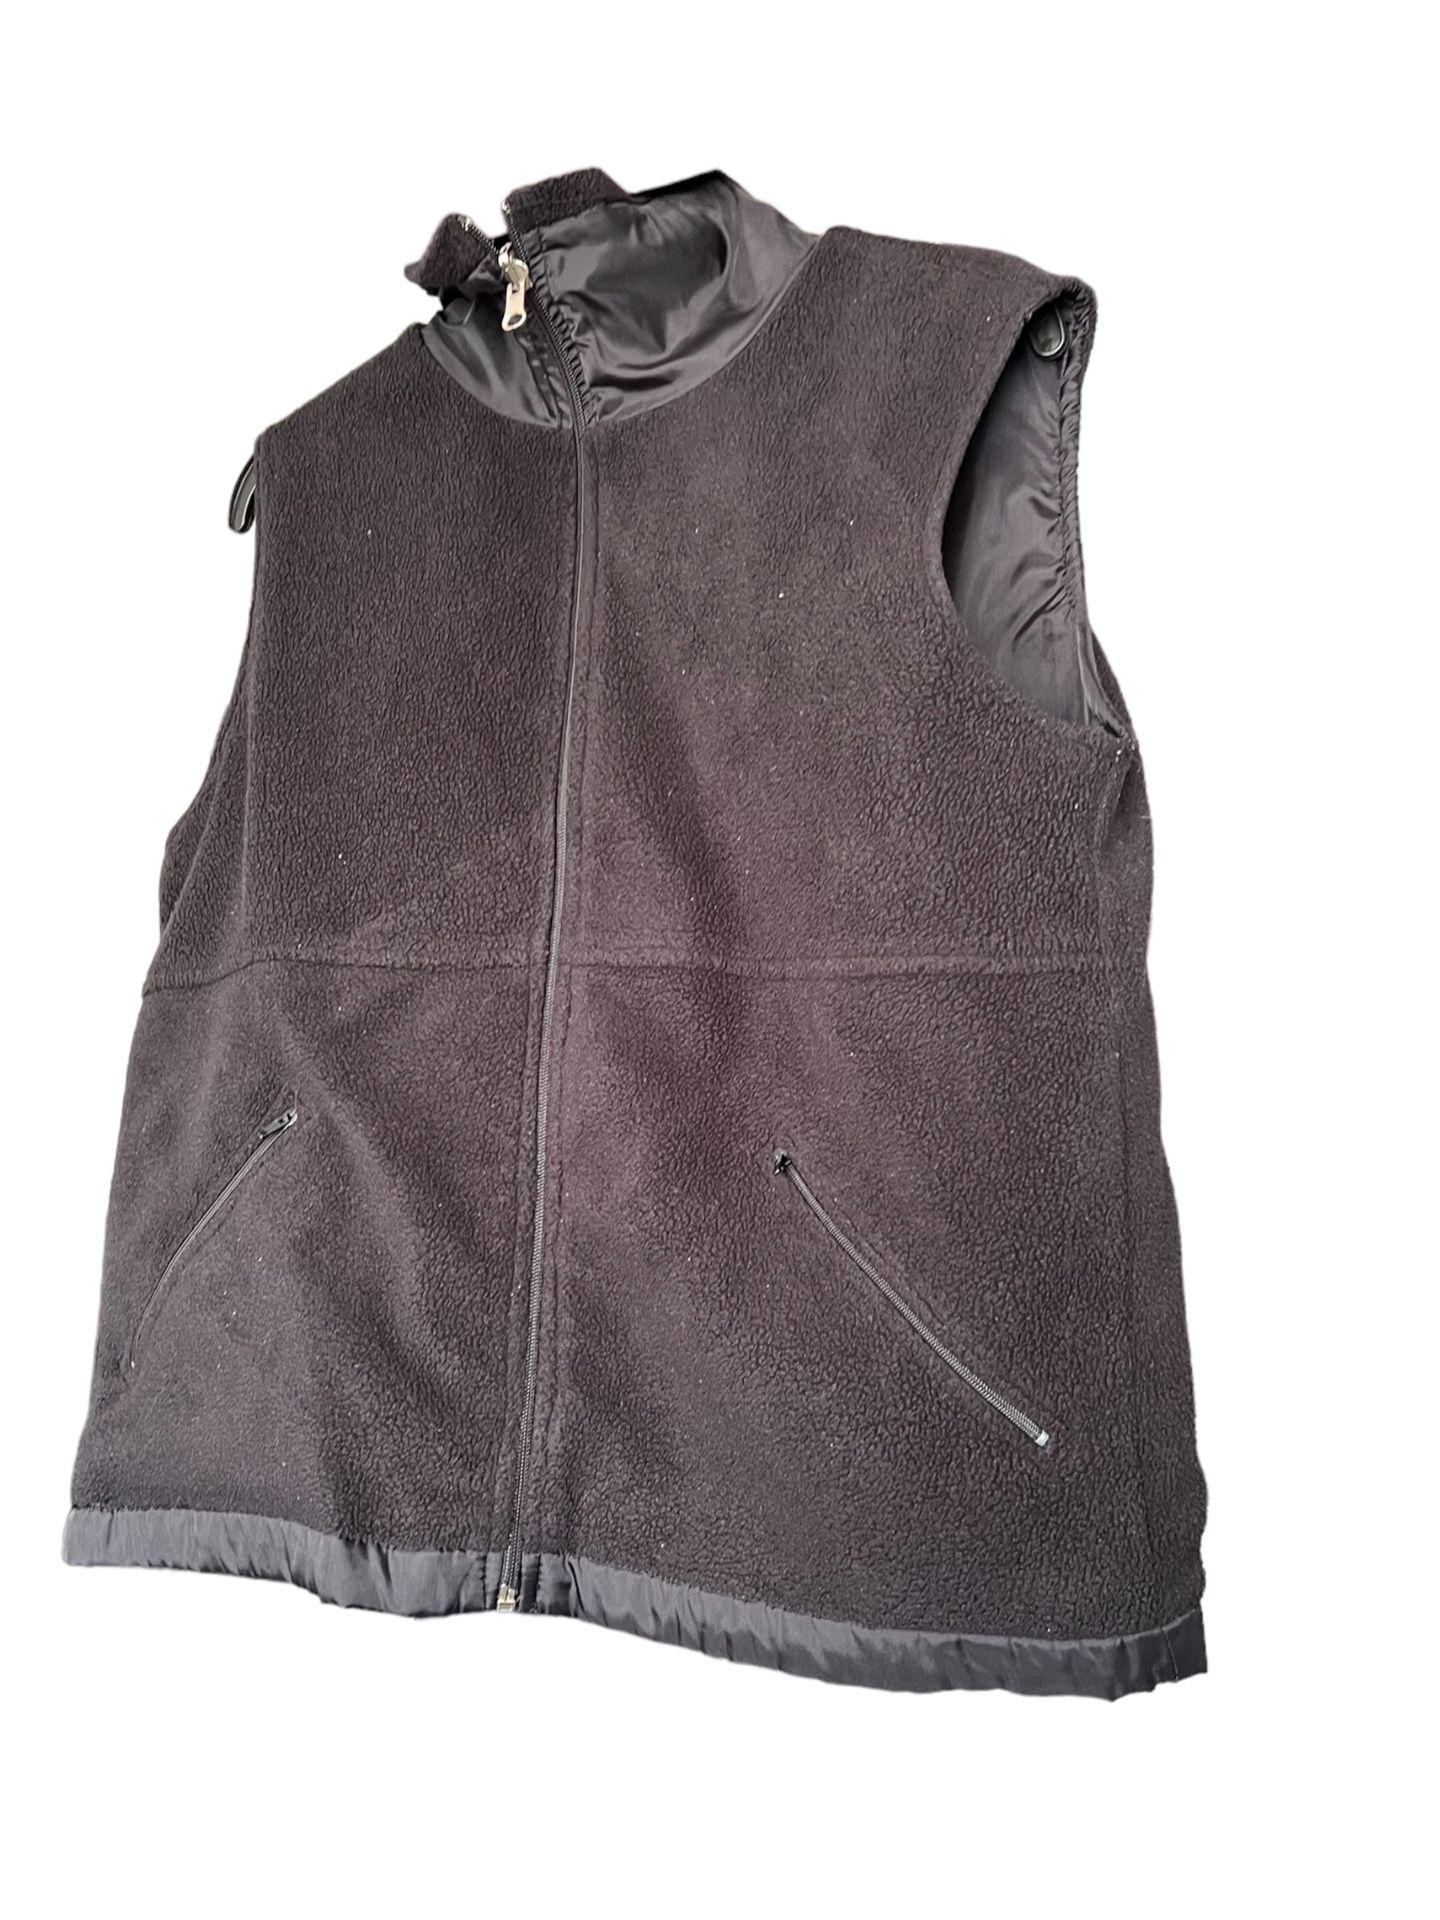 Derek Heart Fleece Fake Fur Zip Up vest size M/L.  Measurements in pictures Pockets on the front. 2.  Also two pockets on the inside Zippers up to the